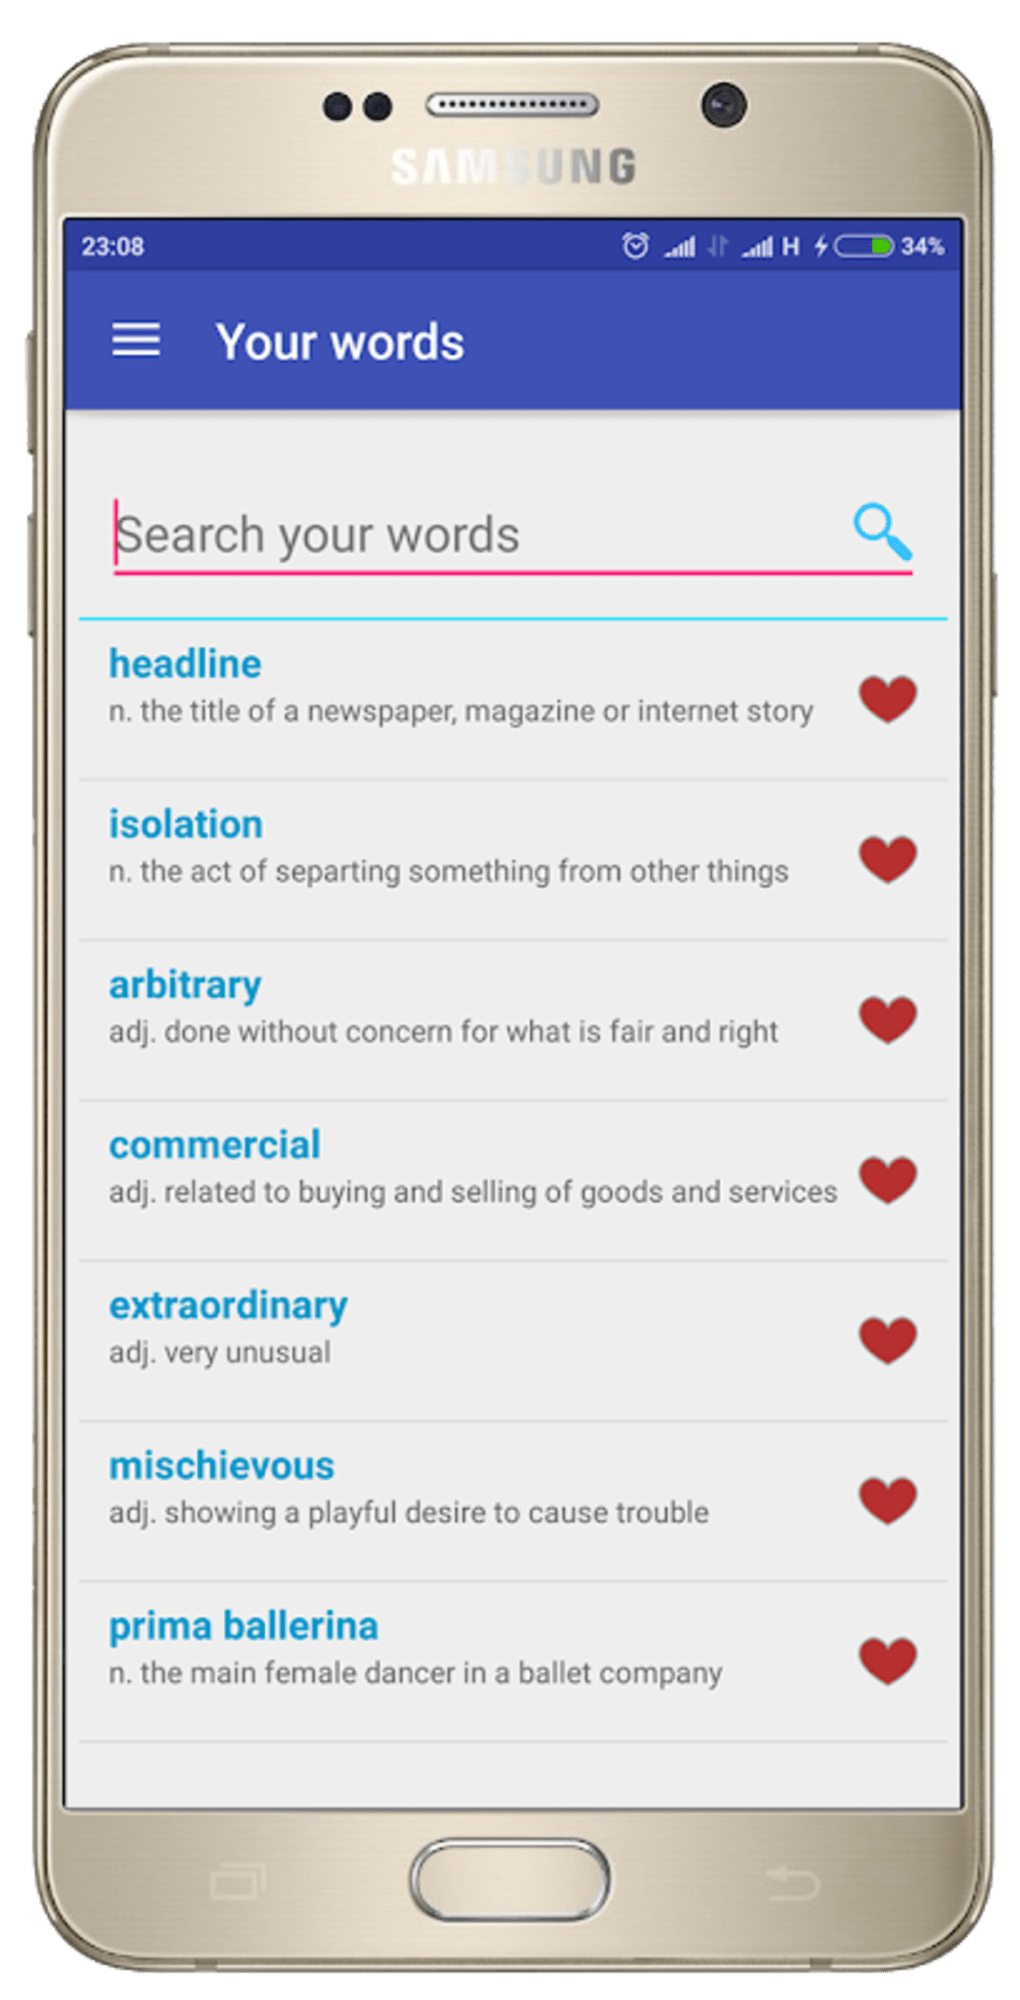 voa-learning-english-listening-reading-apk-for-android-download